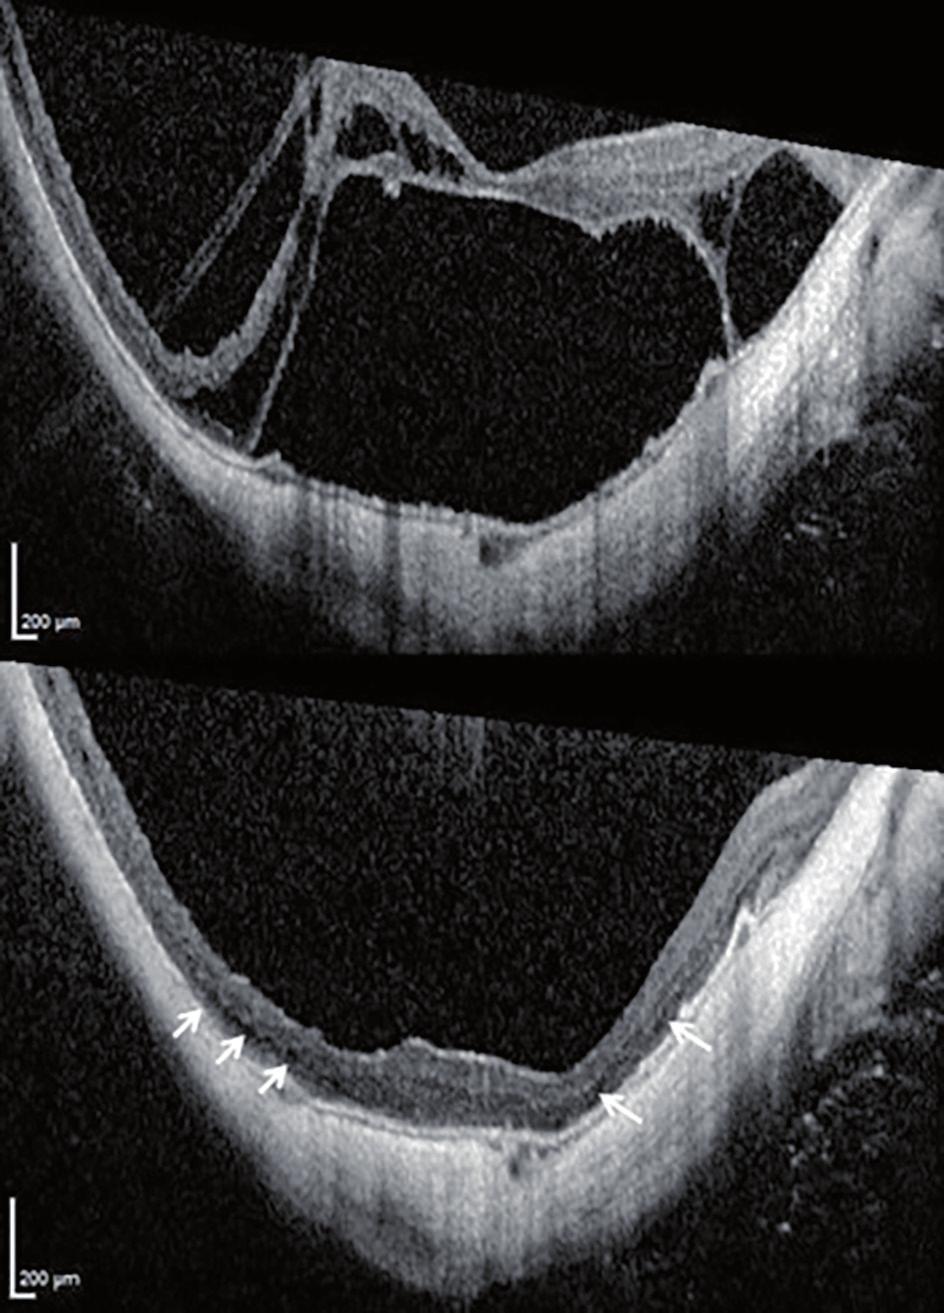 As an intraoperative complication, a peripheral retinal tear was observed and immediately surrounded with 3 rows of argon laser photocoagulation during vitrectomy.